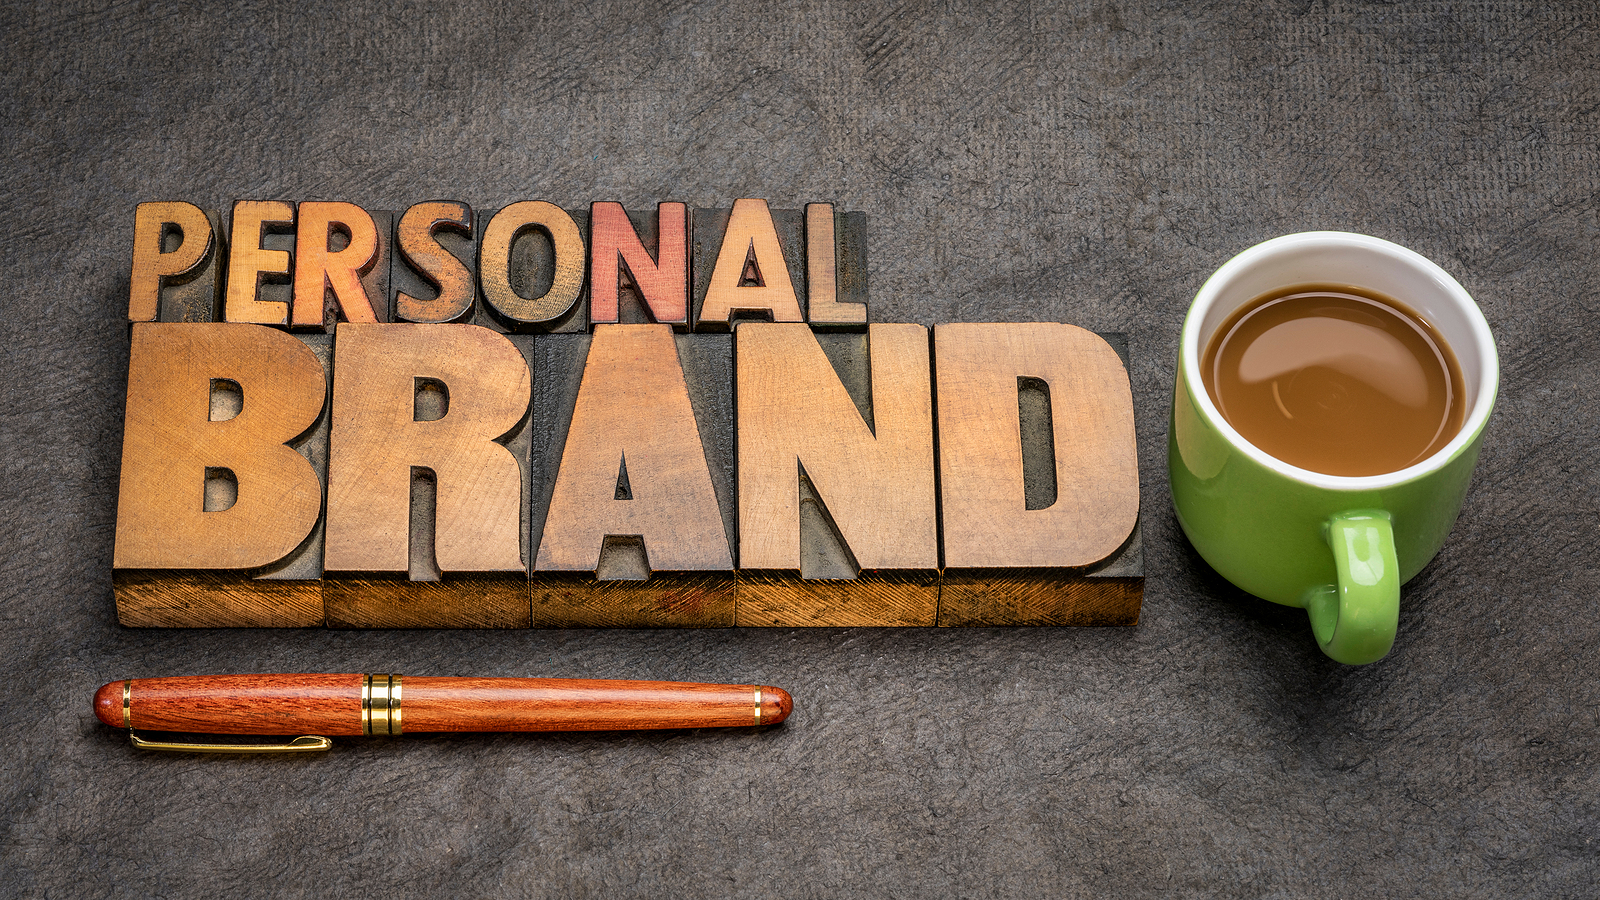 How To Improve Personal Branding - Keep Your Identity Consistent